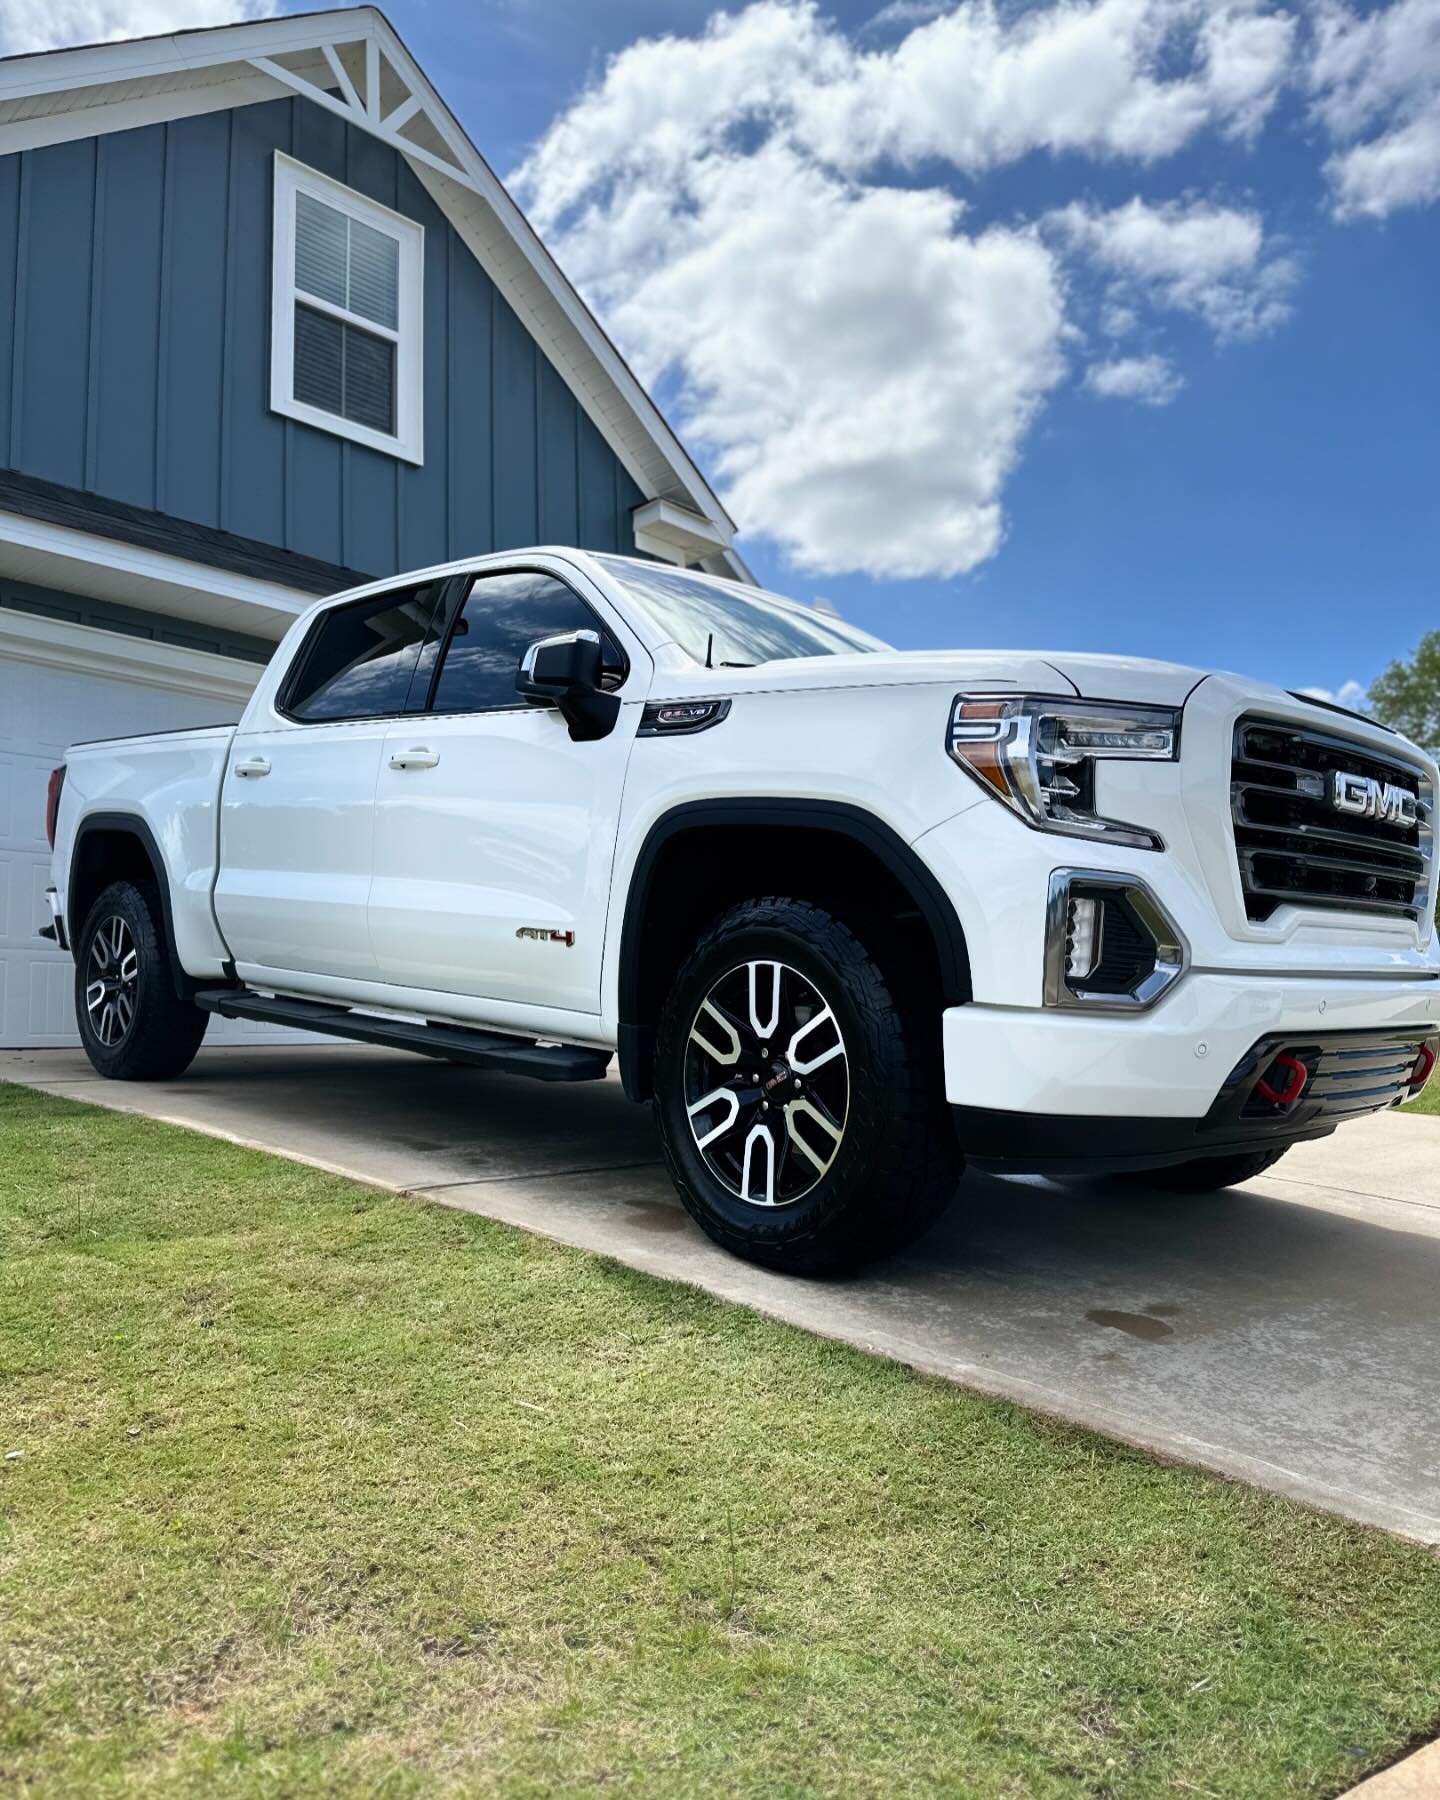 Happy Monday!  Today I got Mrs. Jackson&rsquo;s beautiful truck/office/mom mobile cleaned up and dialed in for her.  Looking to buy a home reach out to her @brittjacksonrealtor

  2020 GMC Sierra 1500 AT4 

✅ ECCD Stage 2 Interior

✅ ECCD Decon Wash 